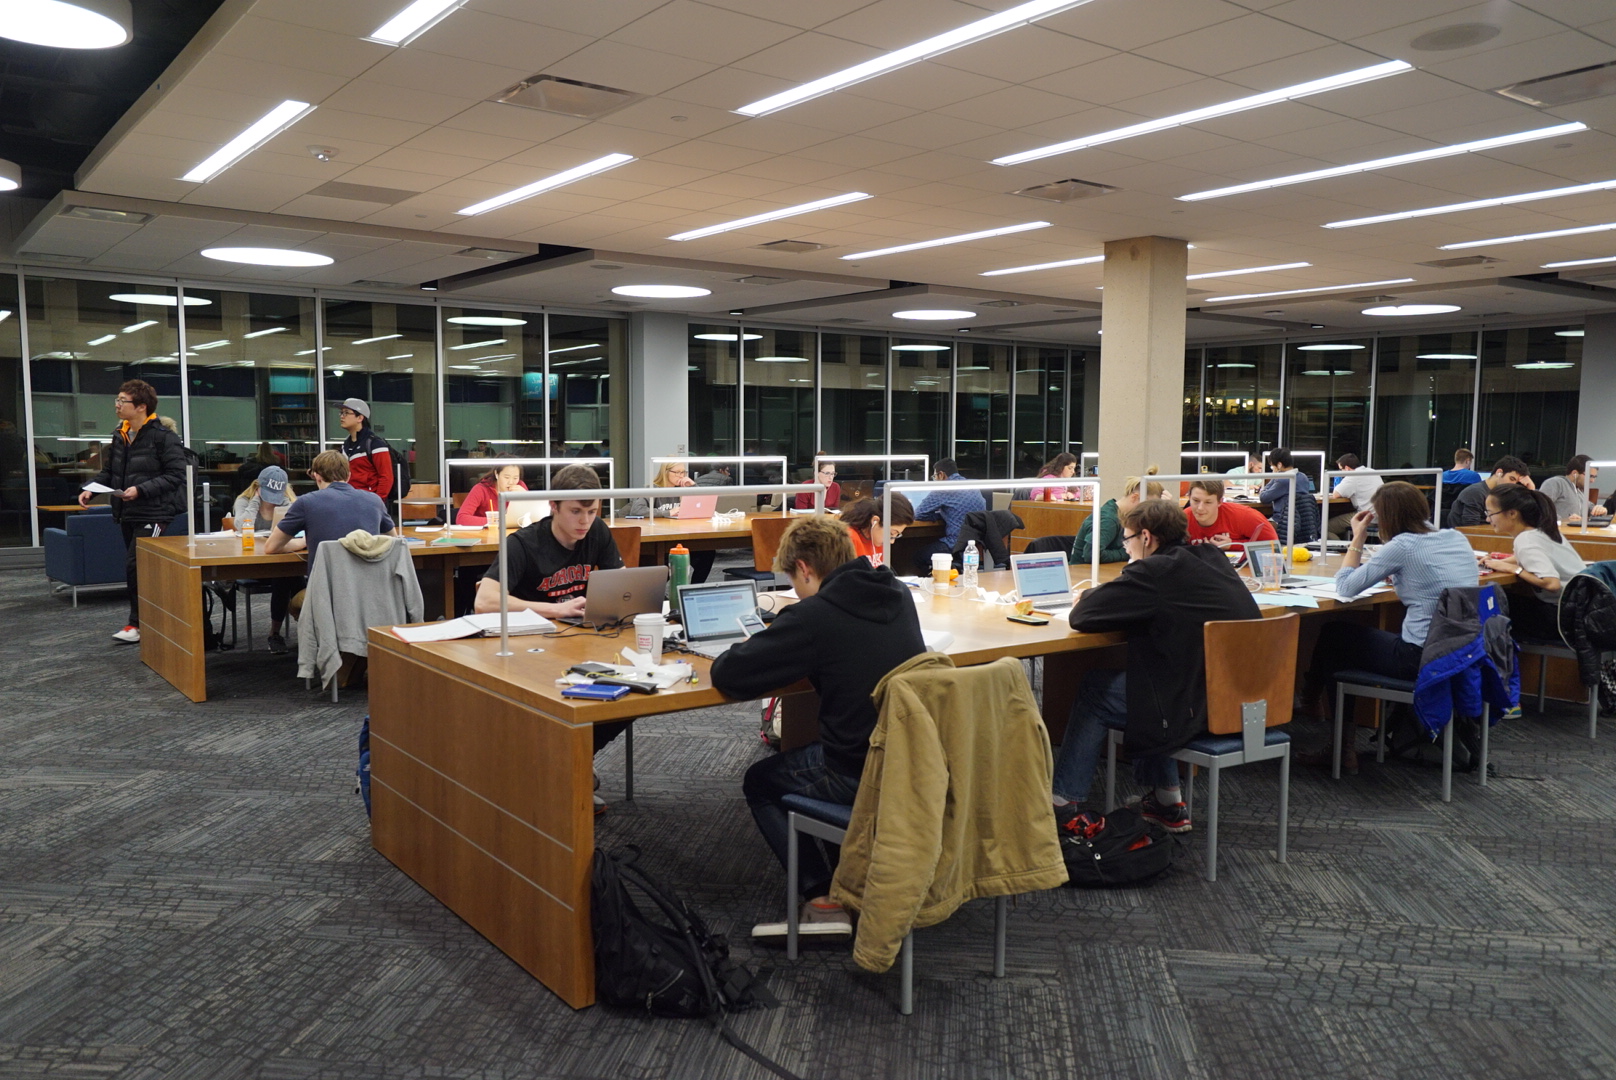 Adele Hall Learning Commons open 24-hours from May 1-12.